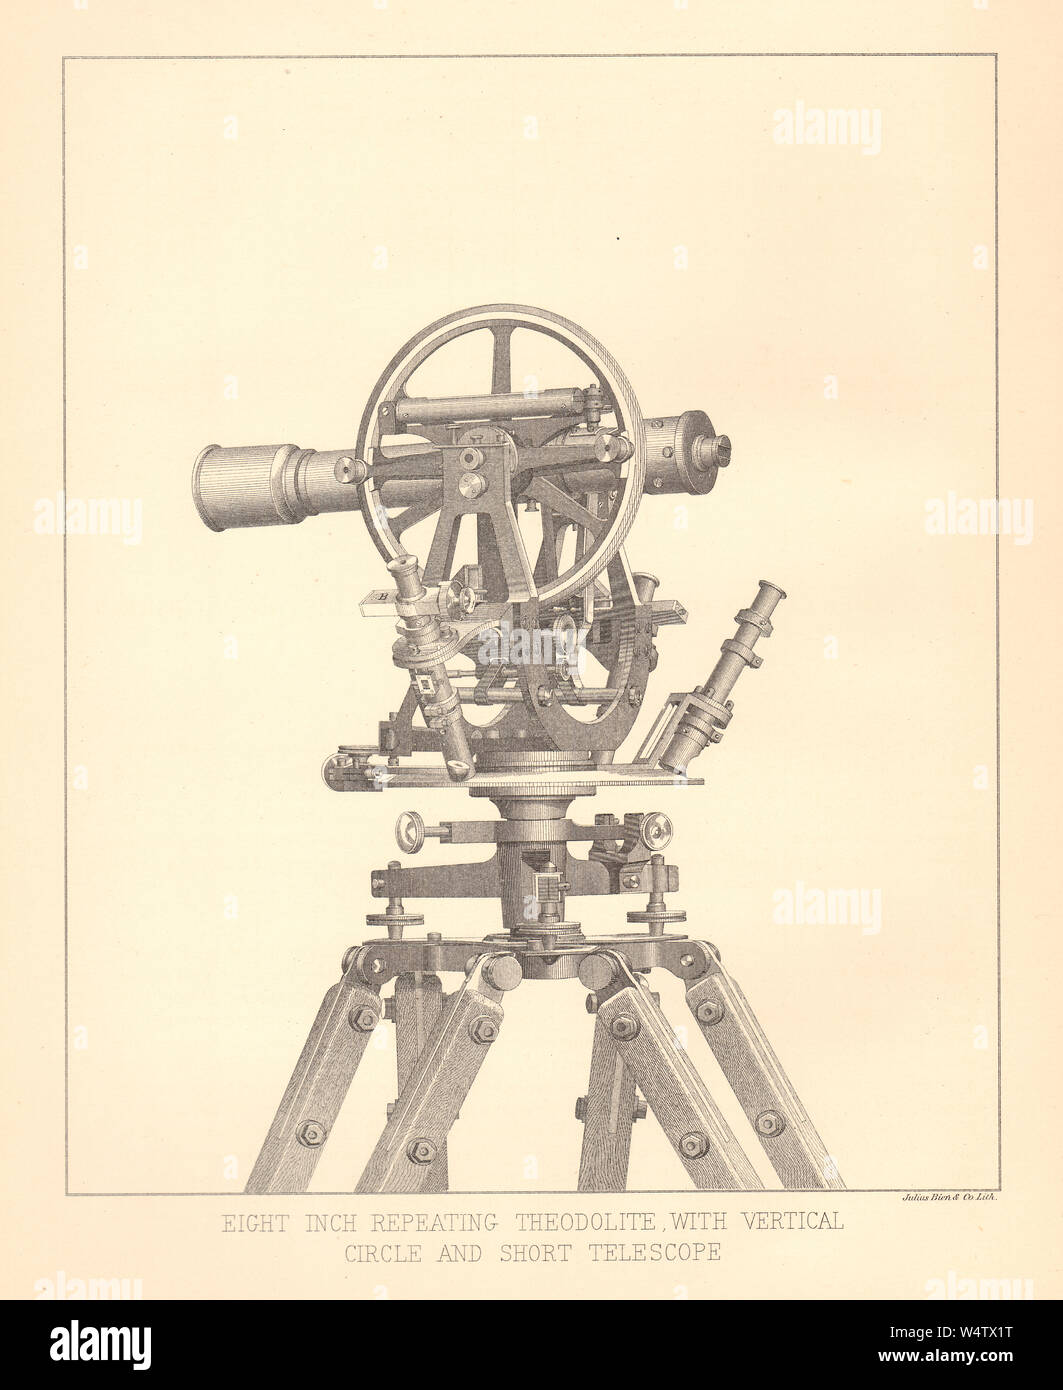 Eight-inch repeating theodolite with Vertical Circle and Short Telescope arranged for measuring zenith distances - Antiquarian bookplate illustration Stock Photo